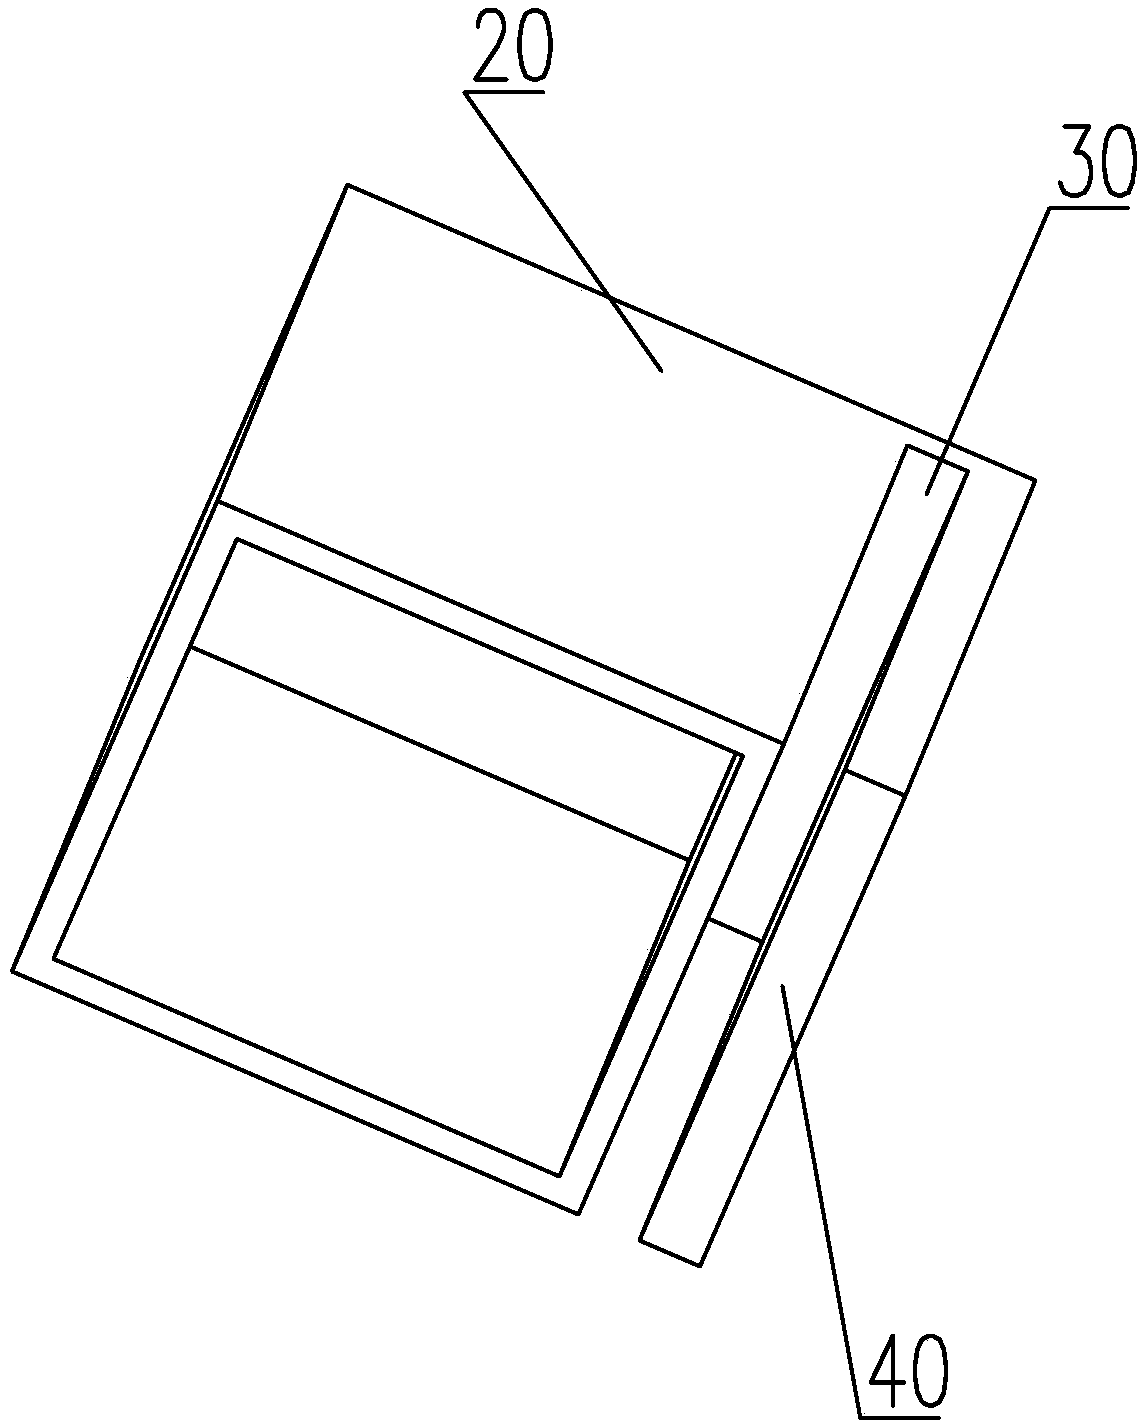 Mortise and tenon structure based on hollow material